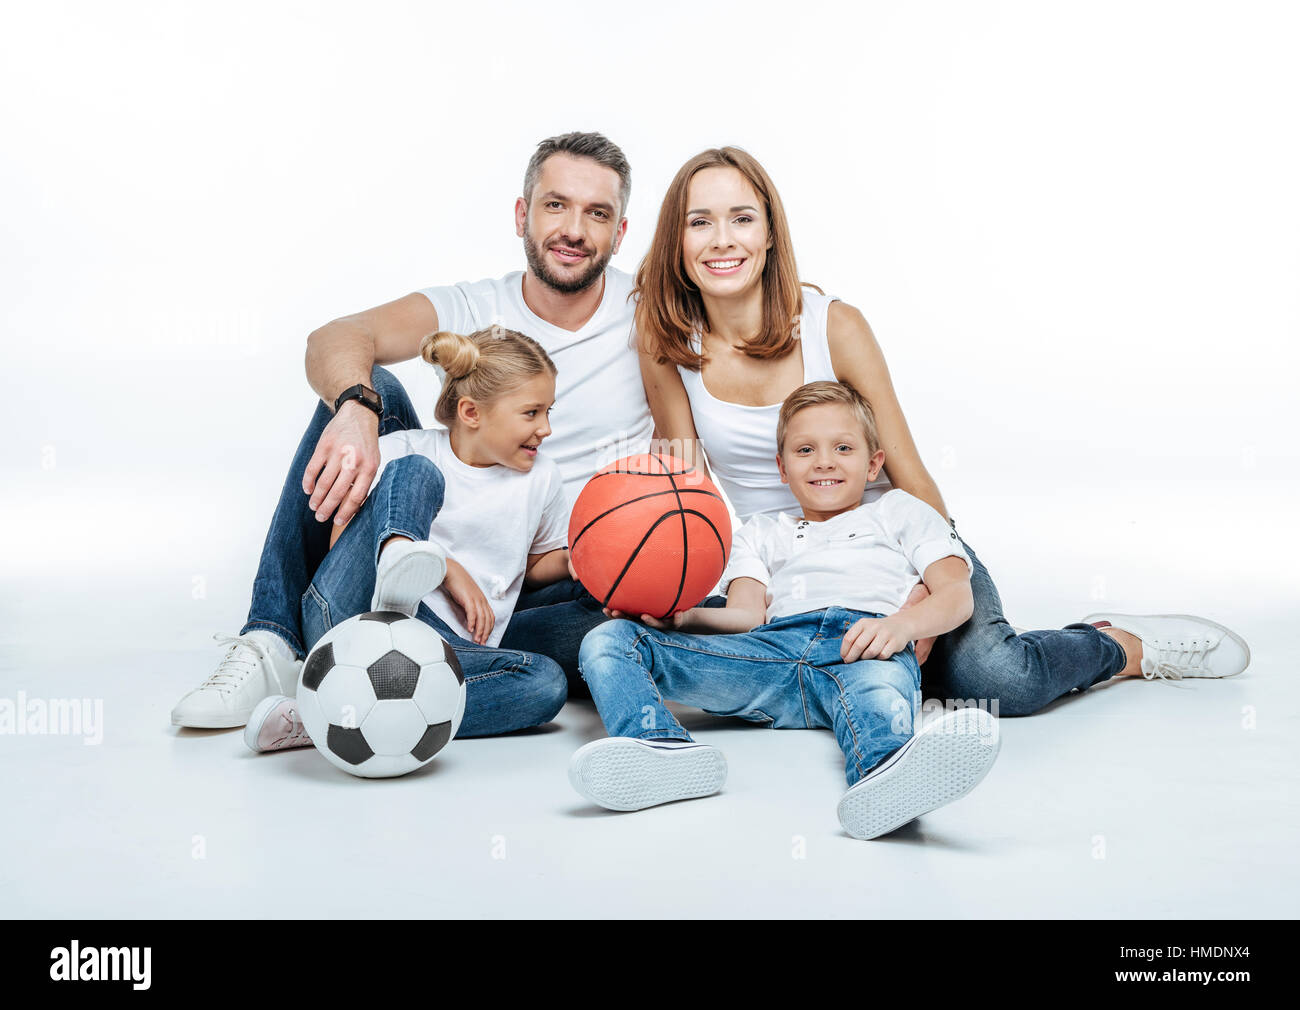 Cheerful family with soccer and basketball balls Stock Photo